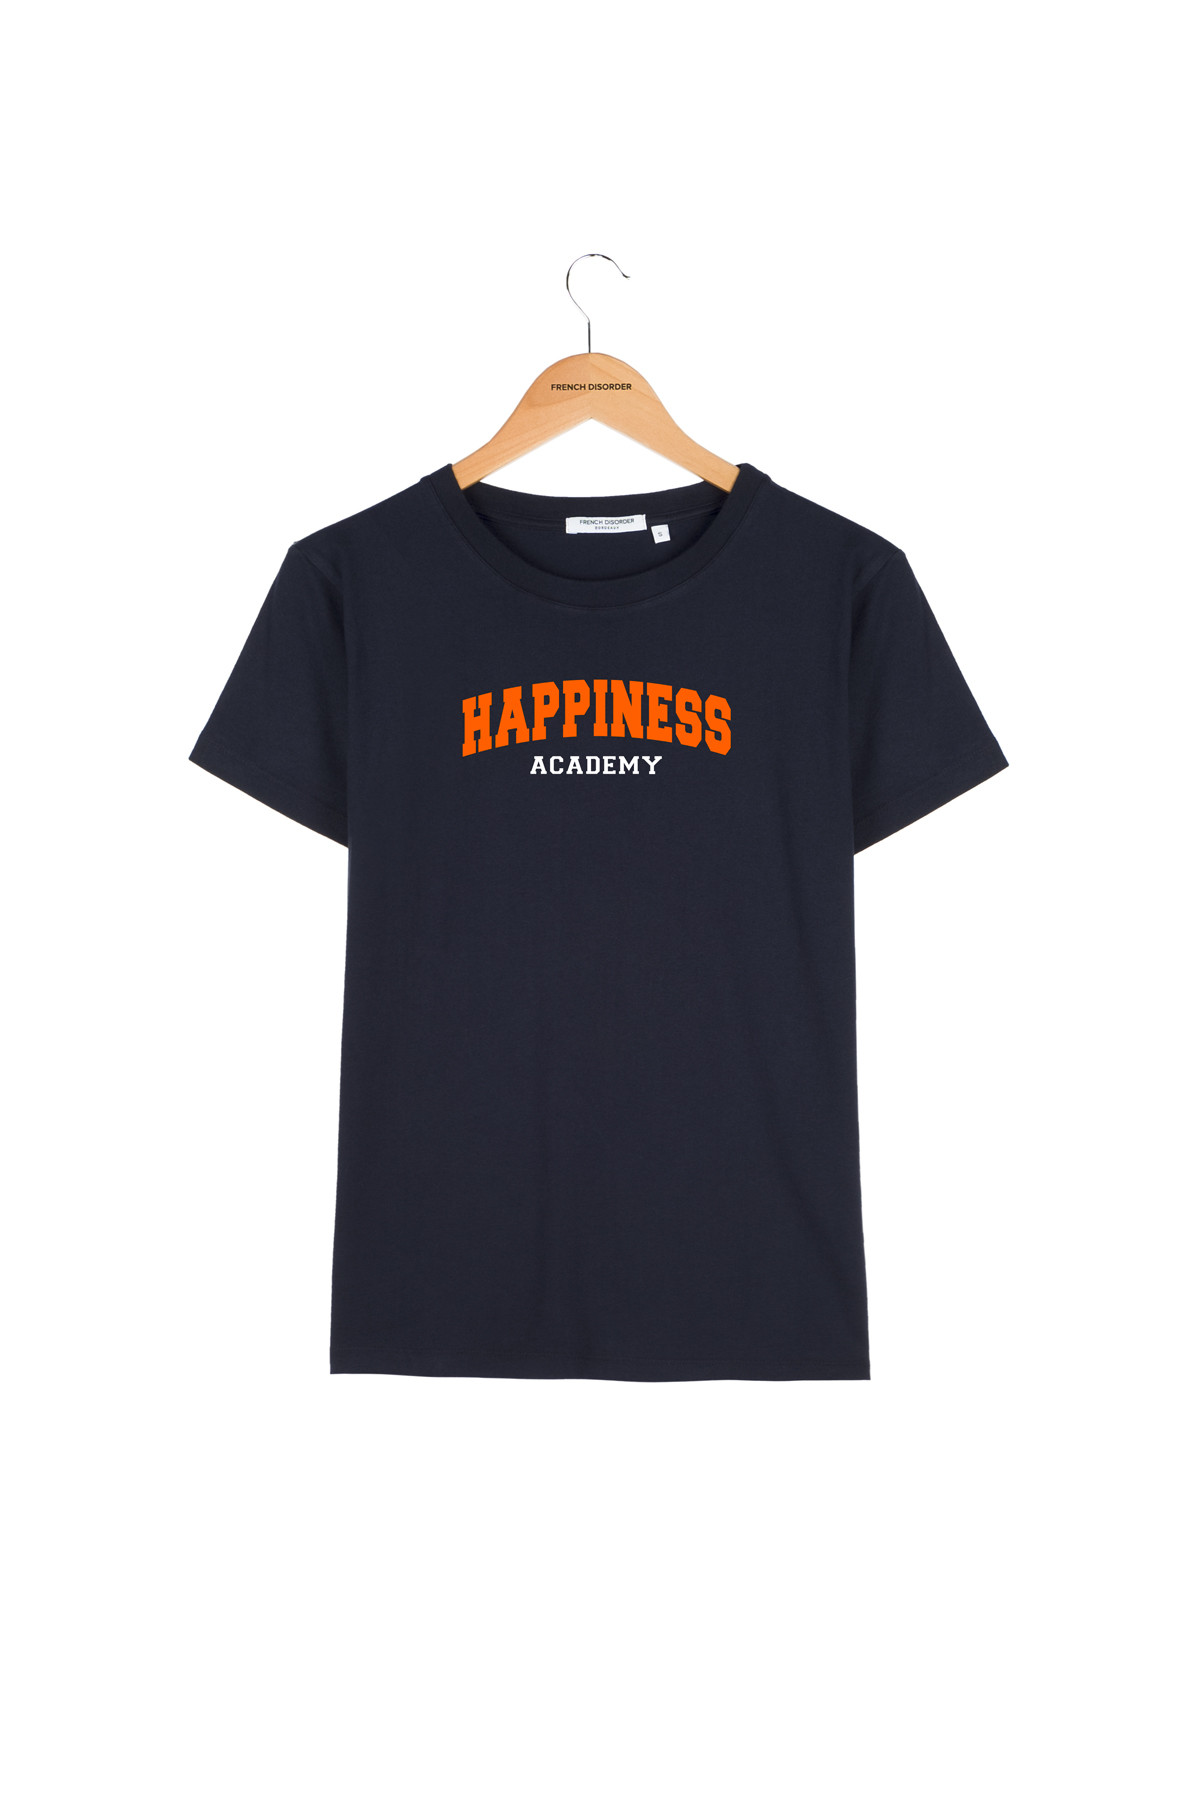 Tshirt HAPPINESS ACADEMY French Disorder